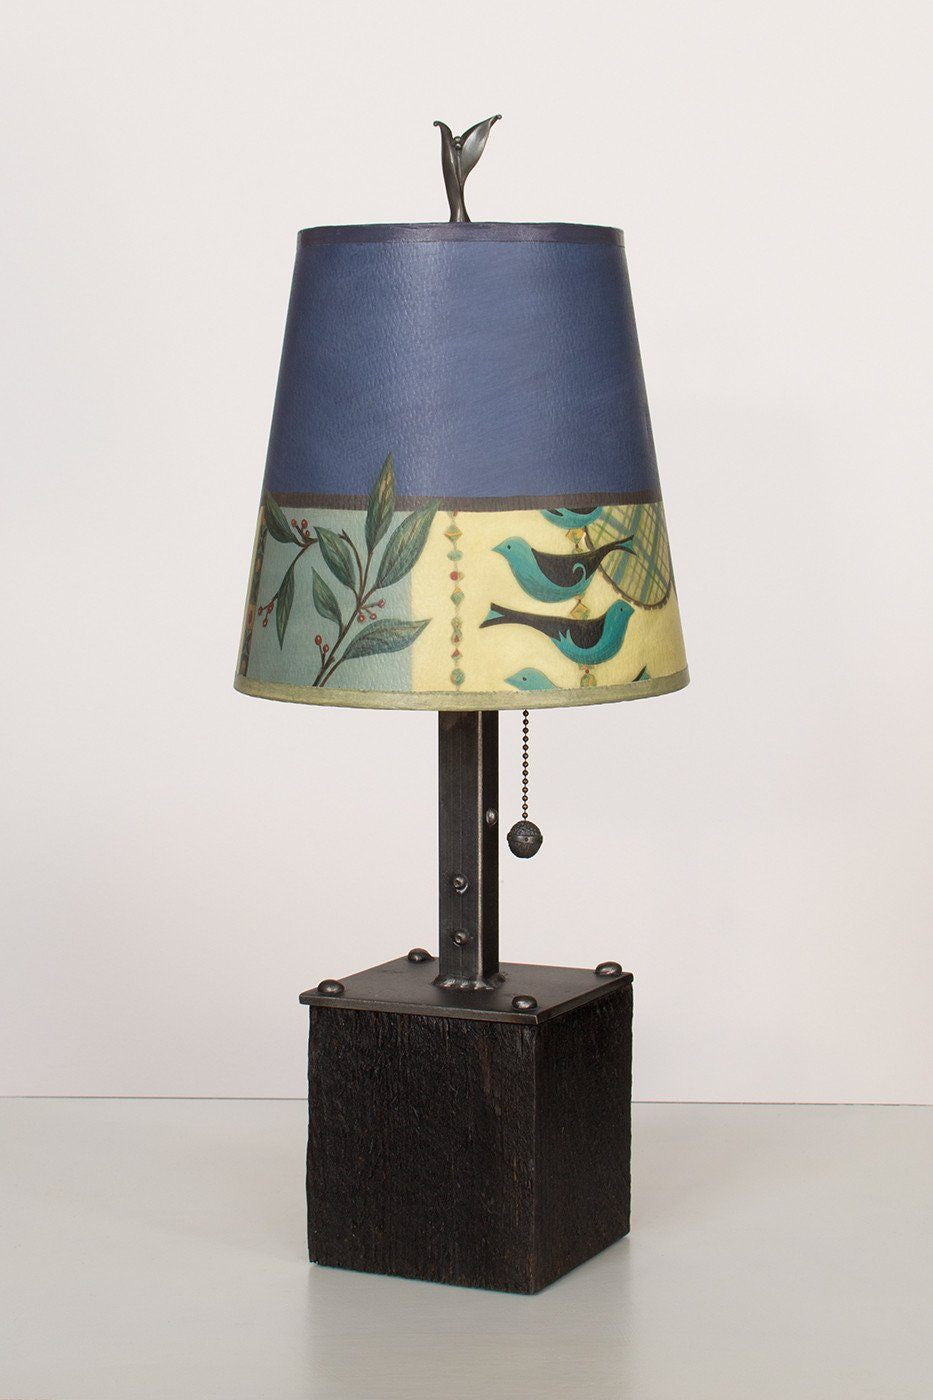 Janna Ugone &amp; Co Table Lamps Steel Table Lamp on Reclaimed Wood with Small Drum Shade in New Capri Periwinkle